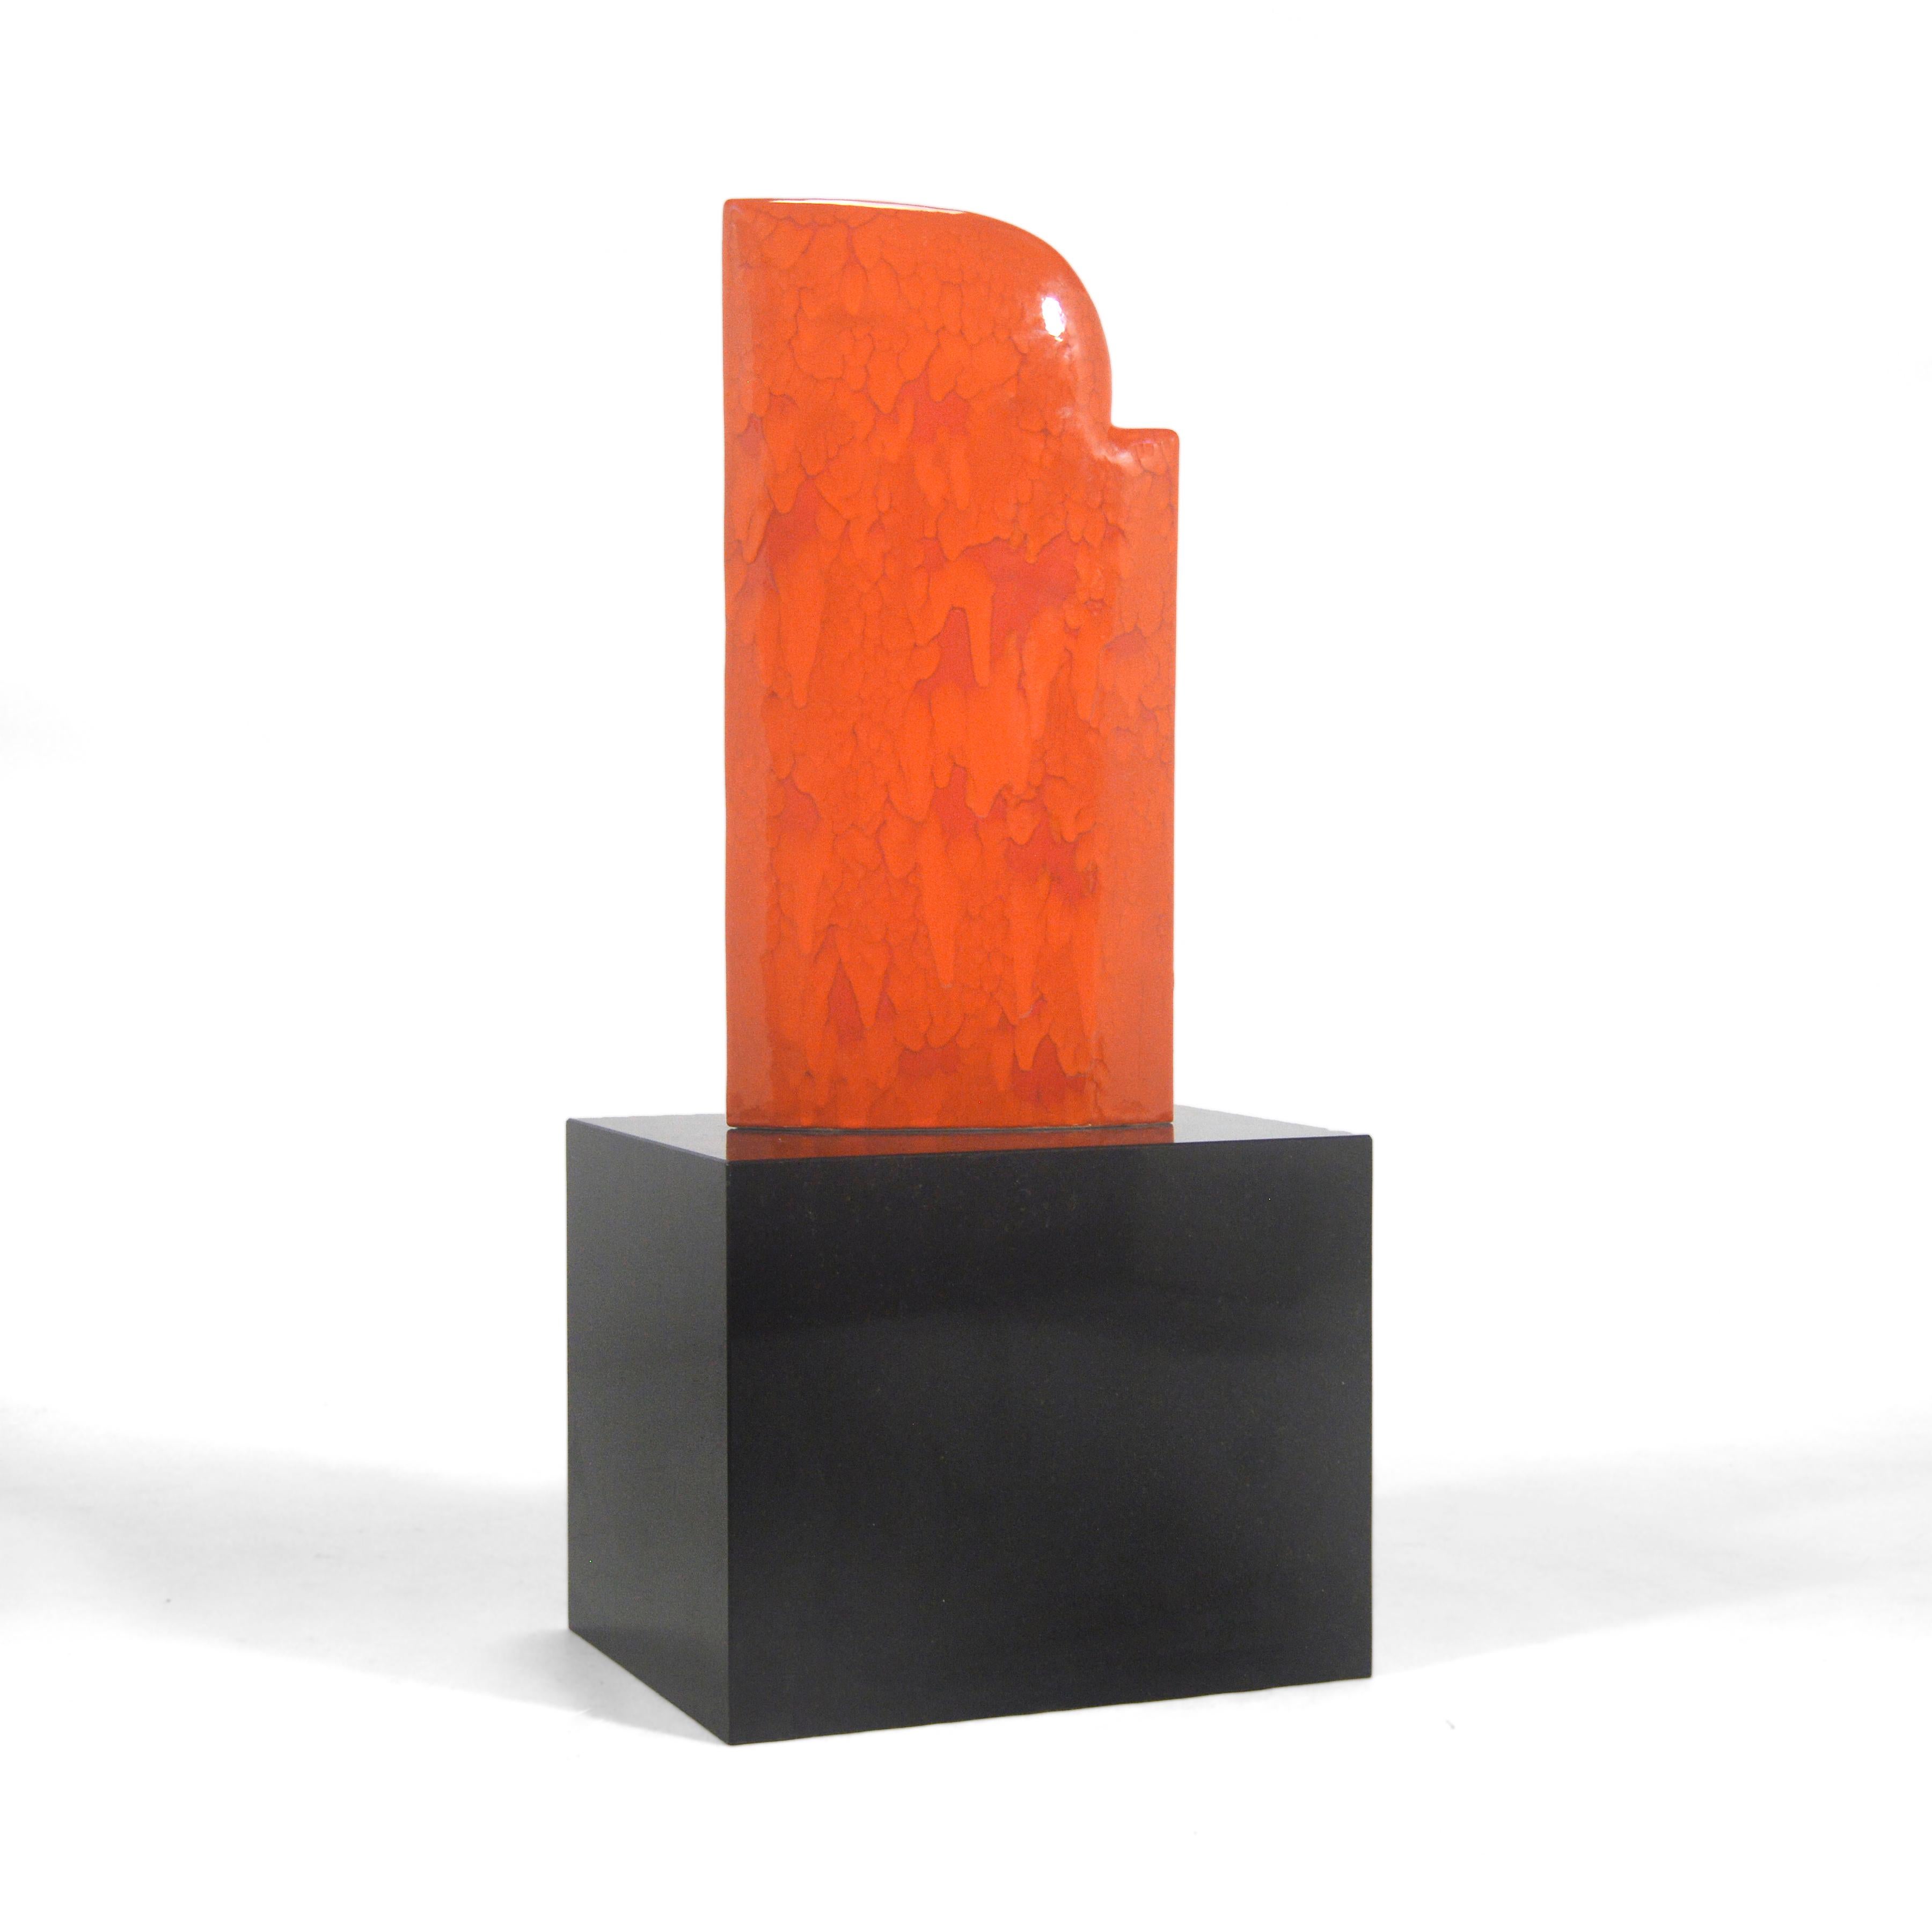 This stunning abstract ceramic sculpture by James Marshall features a minimalist form with a richly textured glaze in a vivid orange color. Executed in 2006, it is fixed to a black stone plinth.

James Marshall (b. 1949) has exhibited widely,